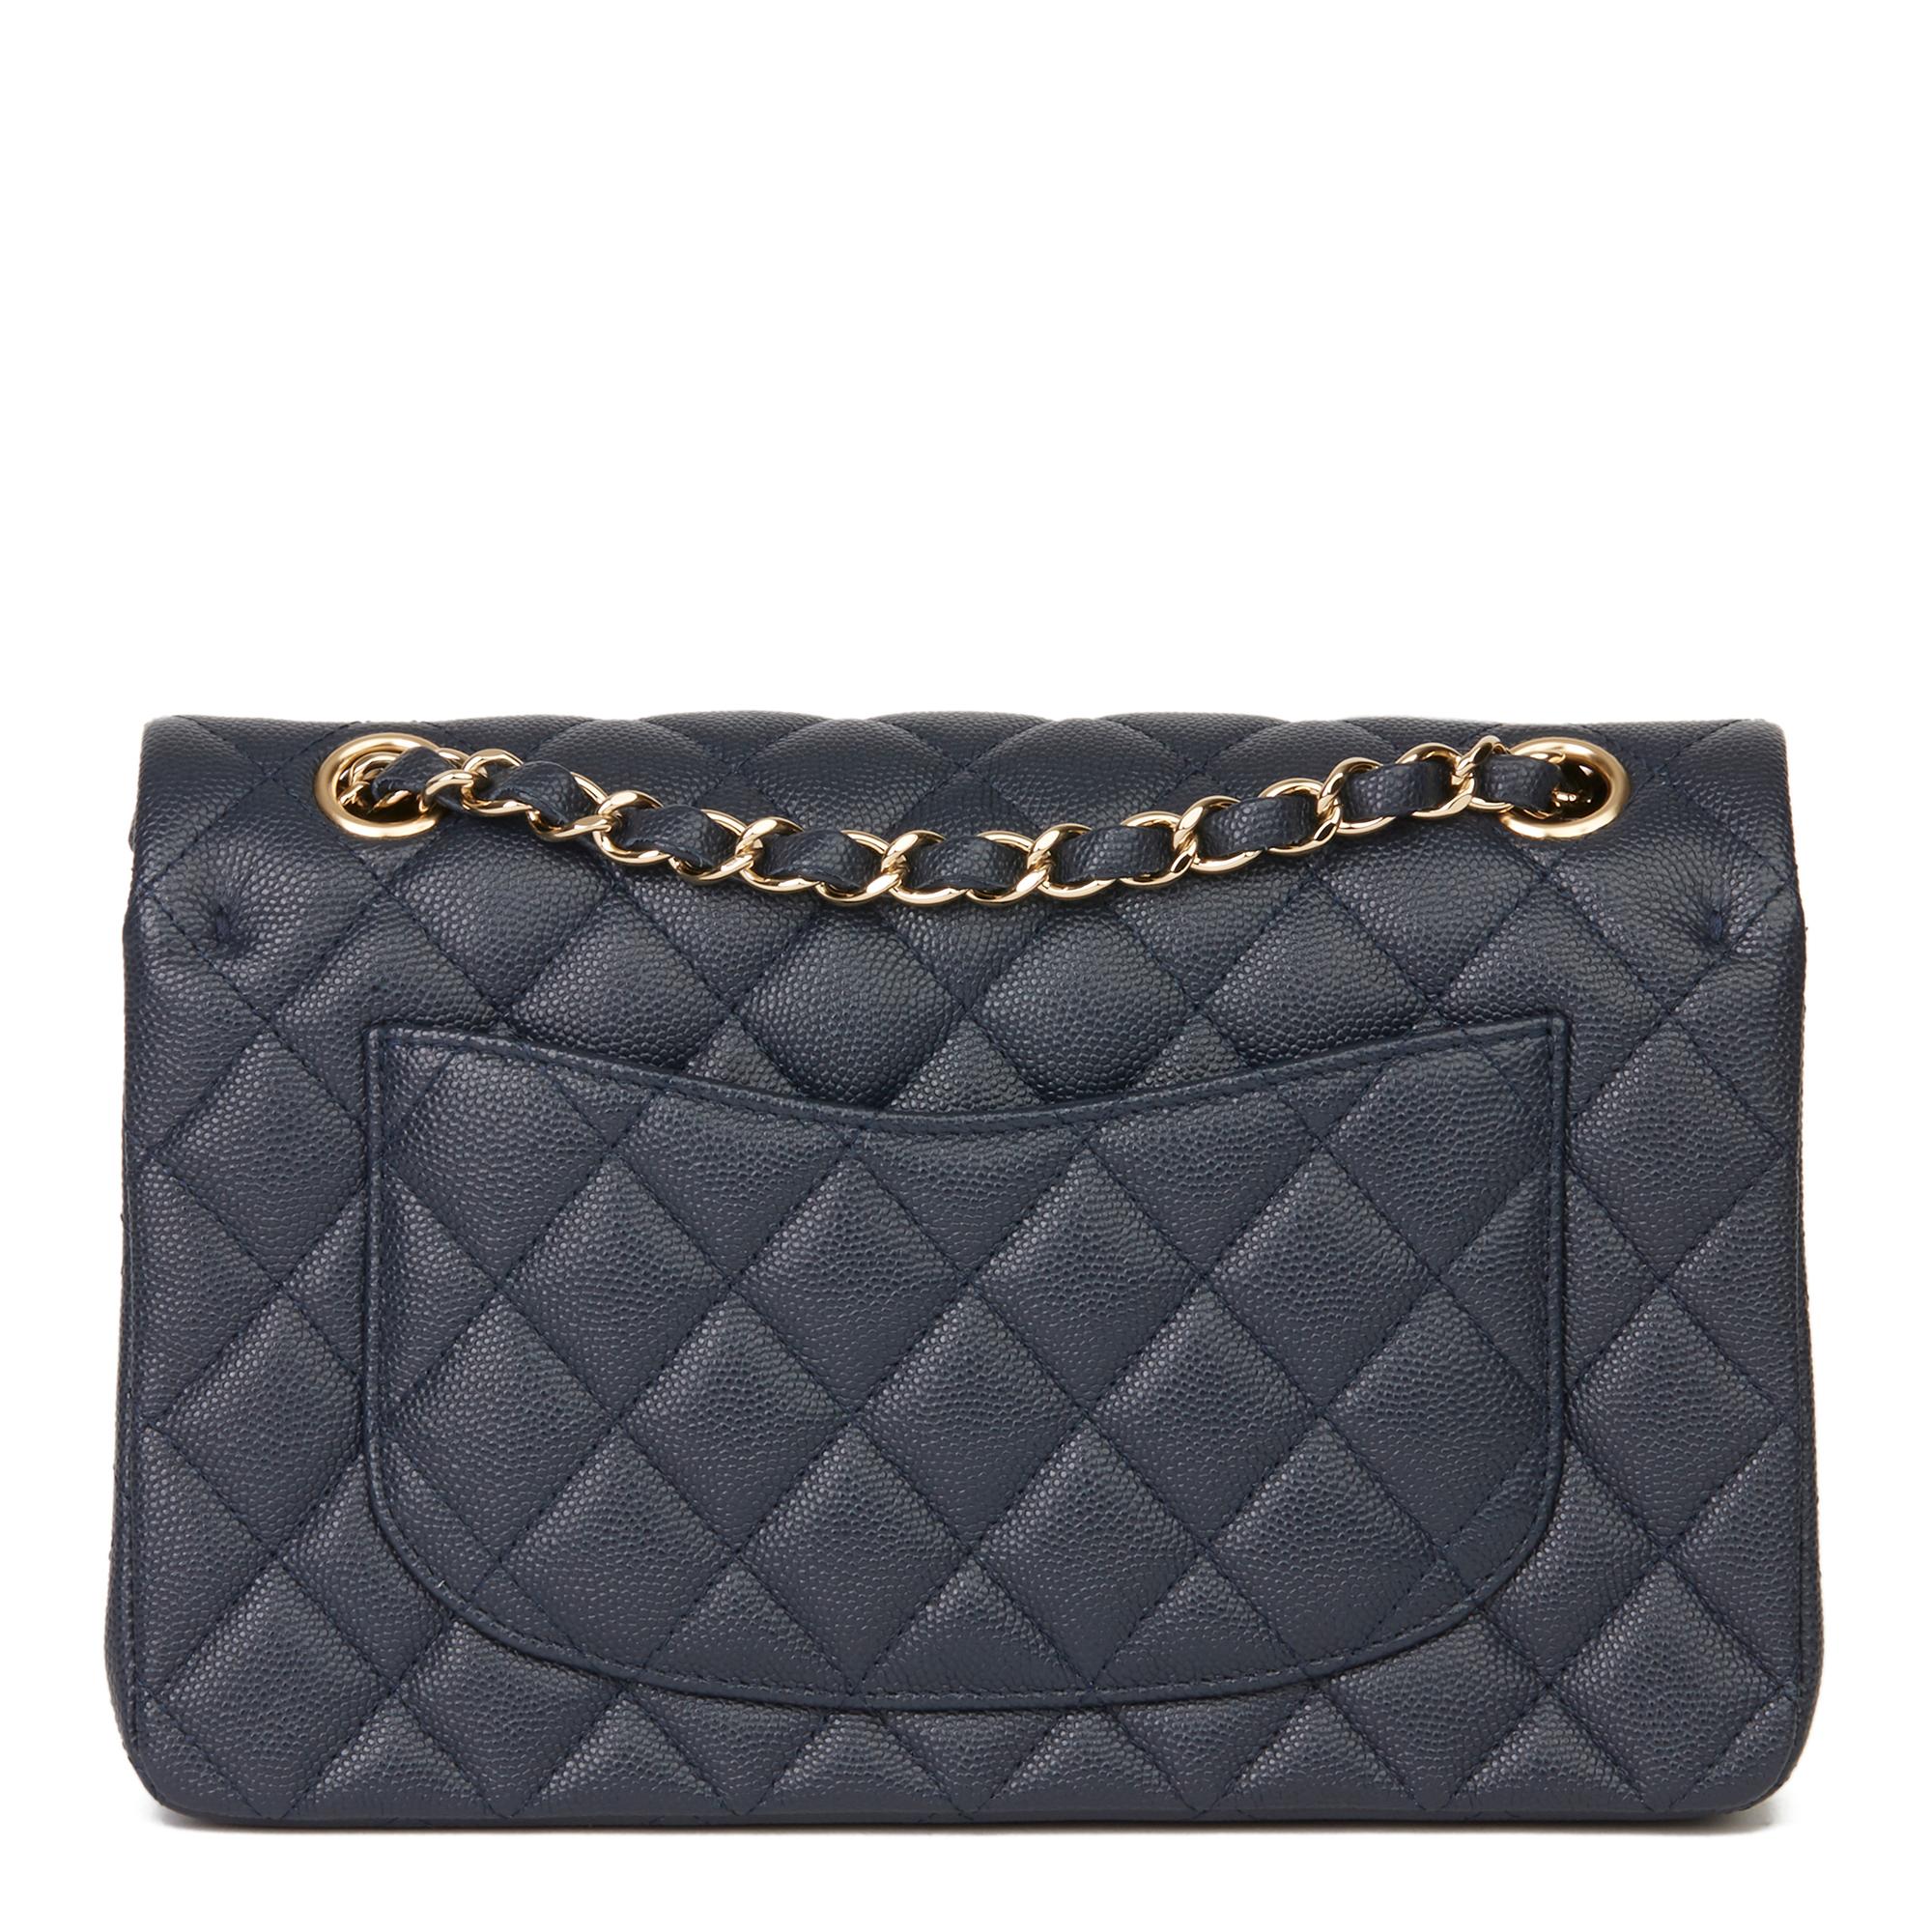 Women's 2019 Chanel Navy Quilted Caviar Leather Small Classic Double Flap Bag 